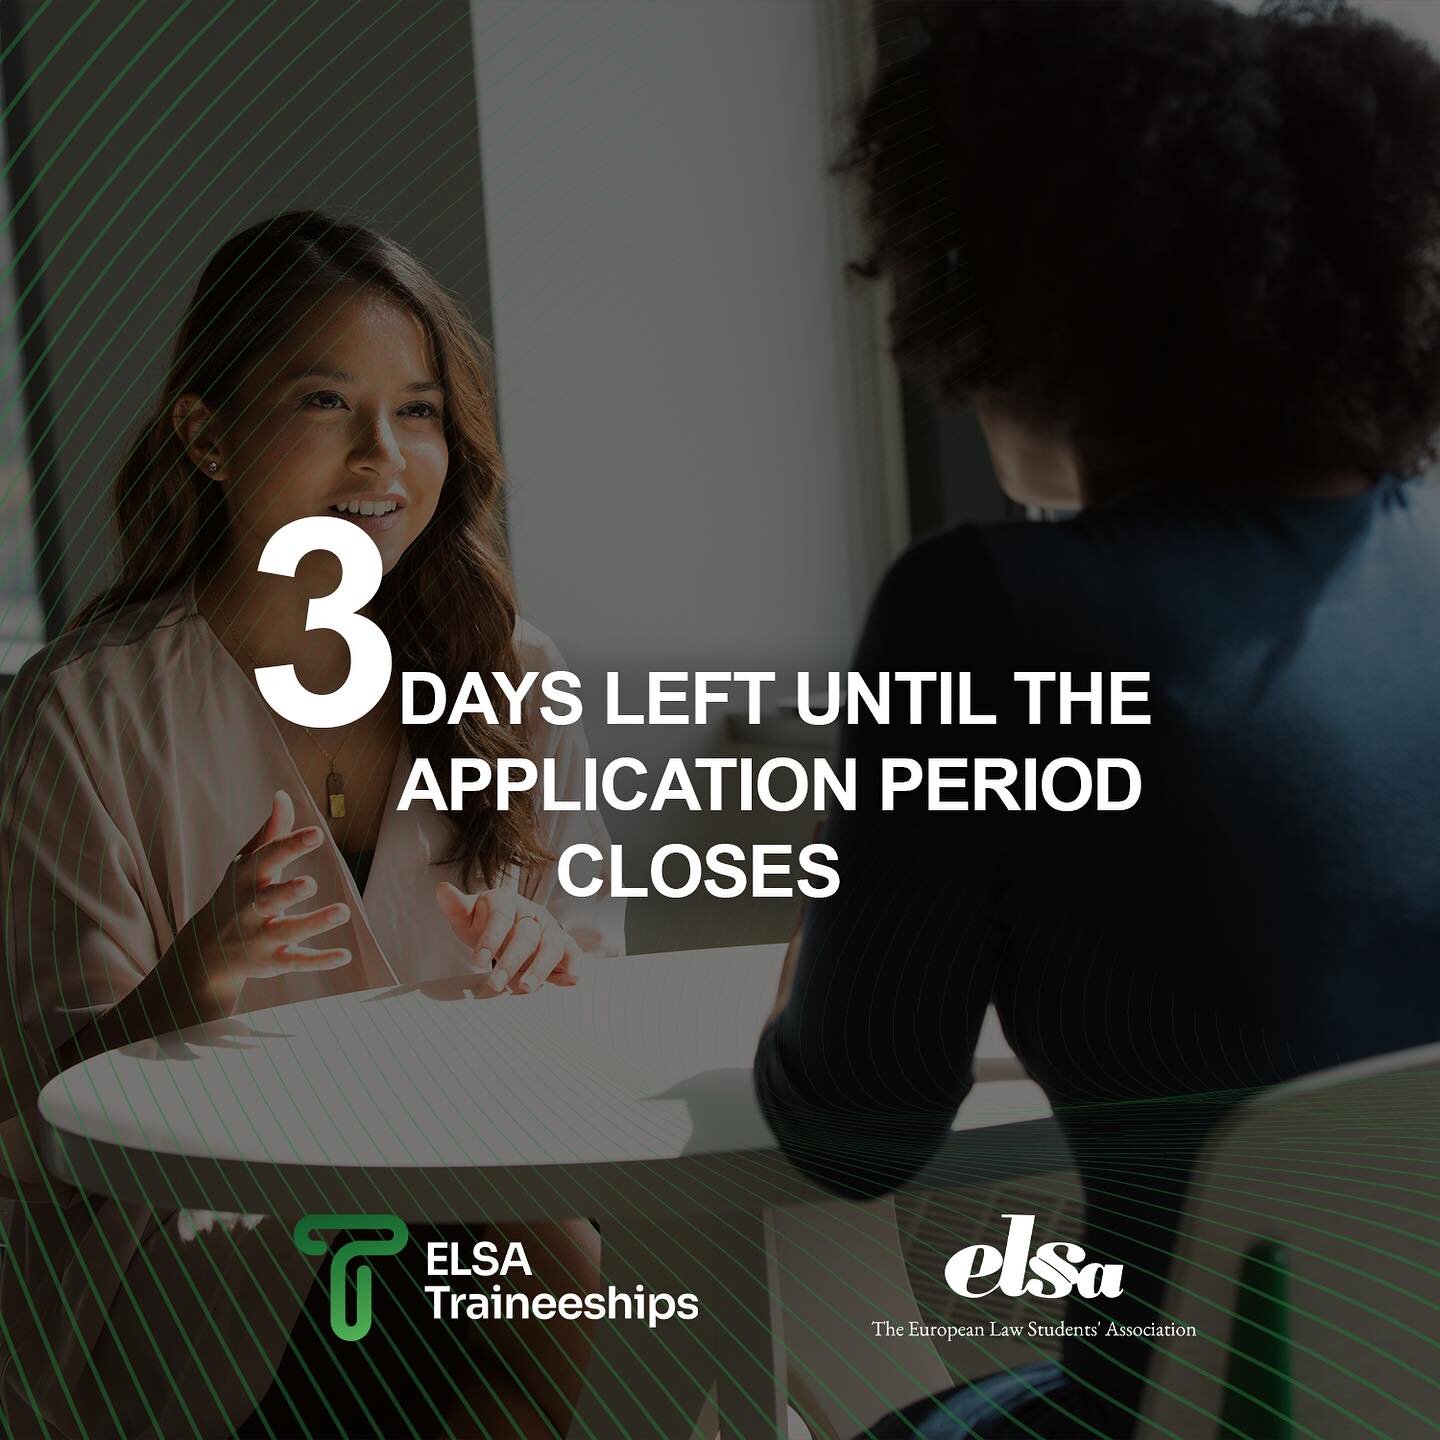 3 days left until the application period for ELSA Traineeships ends!

This is the chance to improve your legal skills abroad. Applications close on 4th December at 23:59 CET. Don&rsquo;t miss out and apply at traineeships.elsa.org